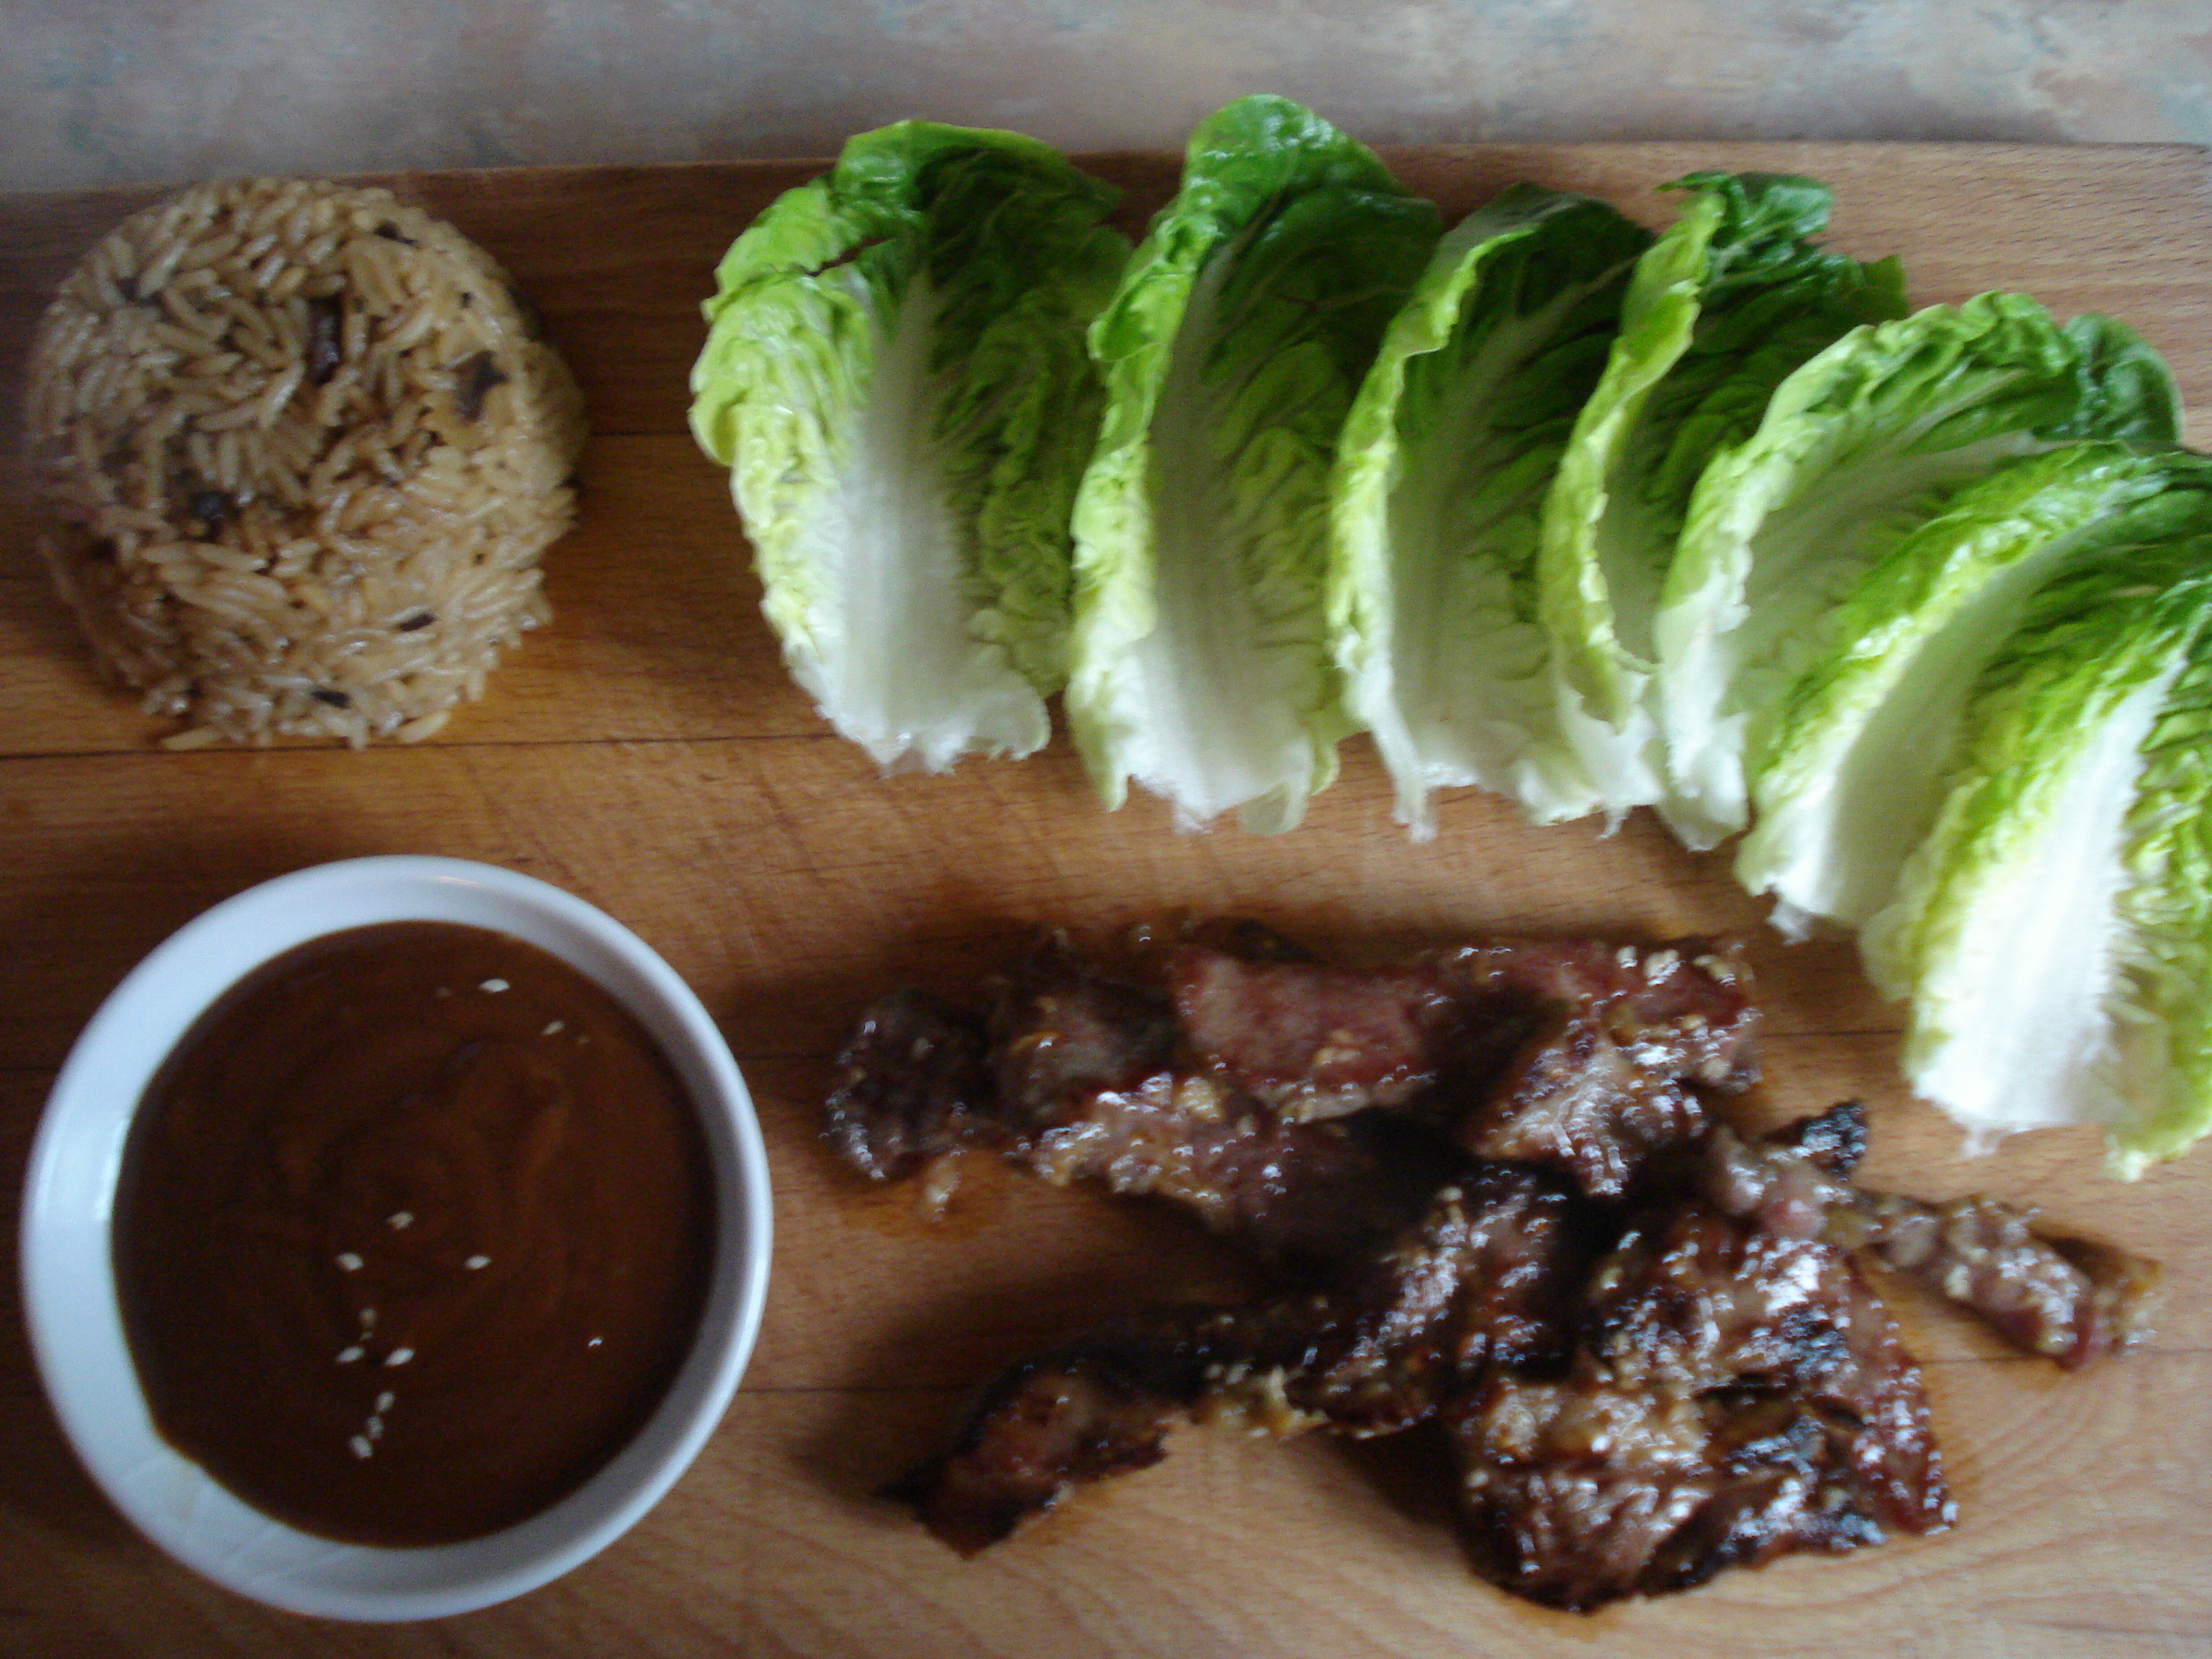 kalbi with ssam jang sauce with lettuce and rice